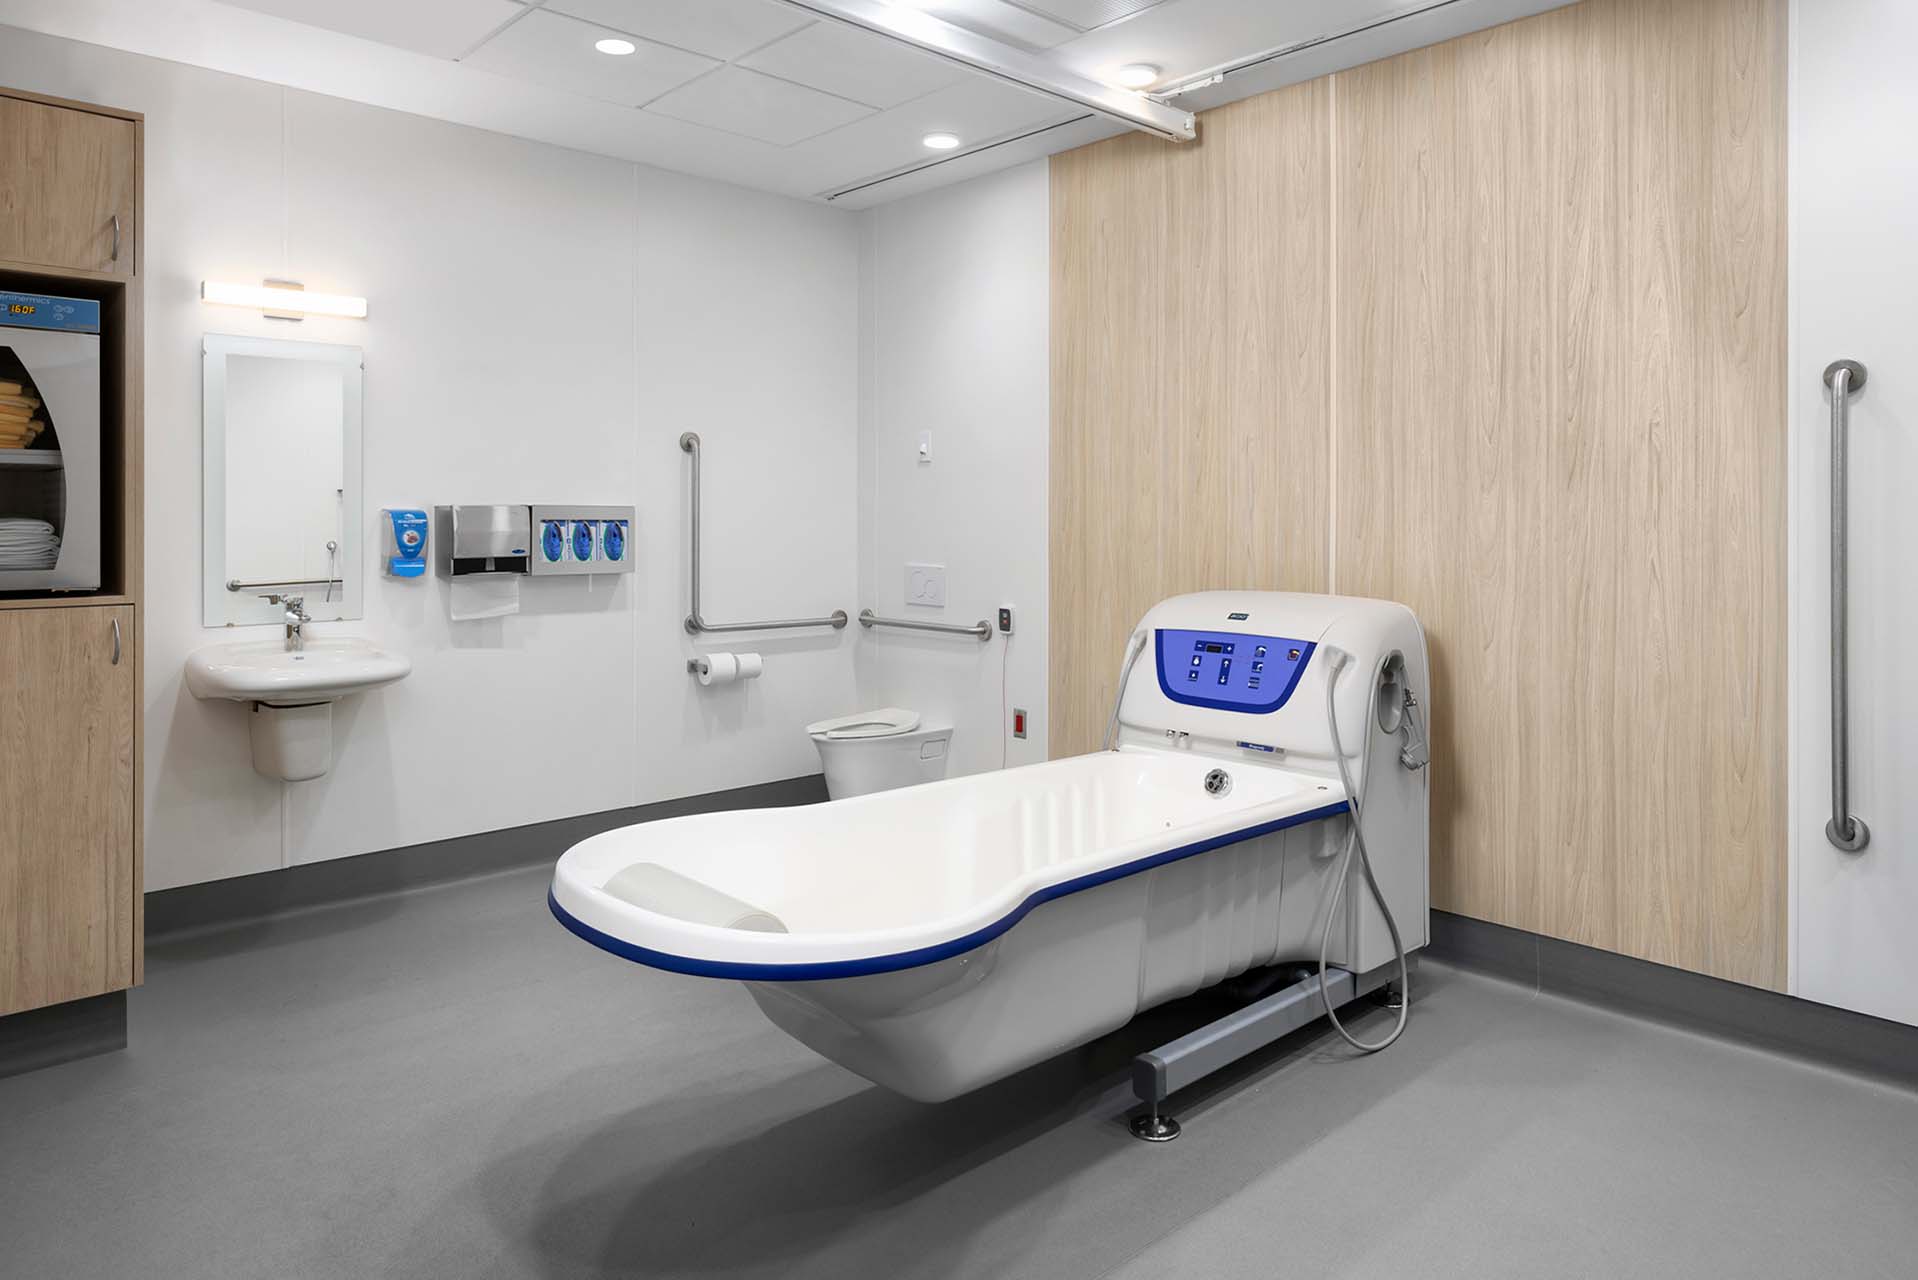 Altro Whiterock wall designs installed in hospice home